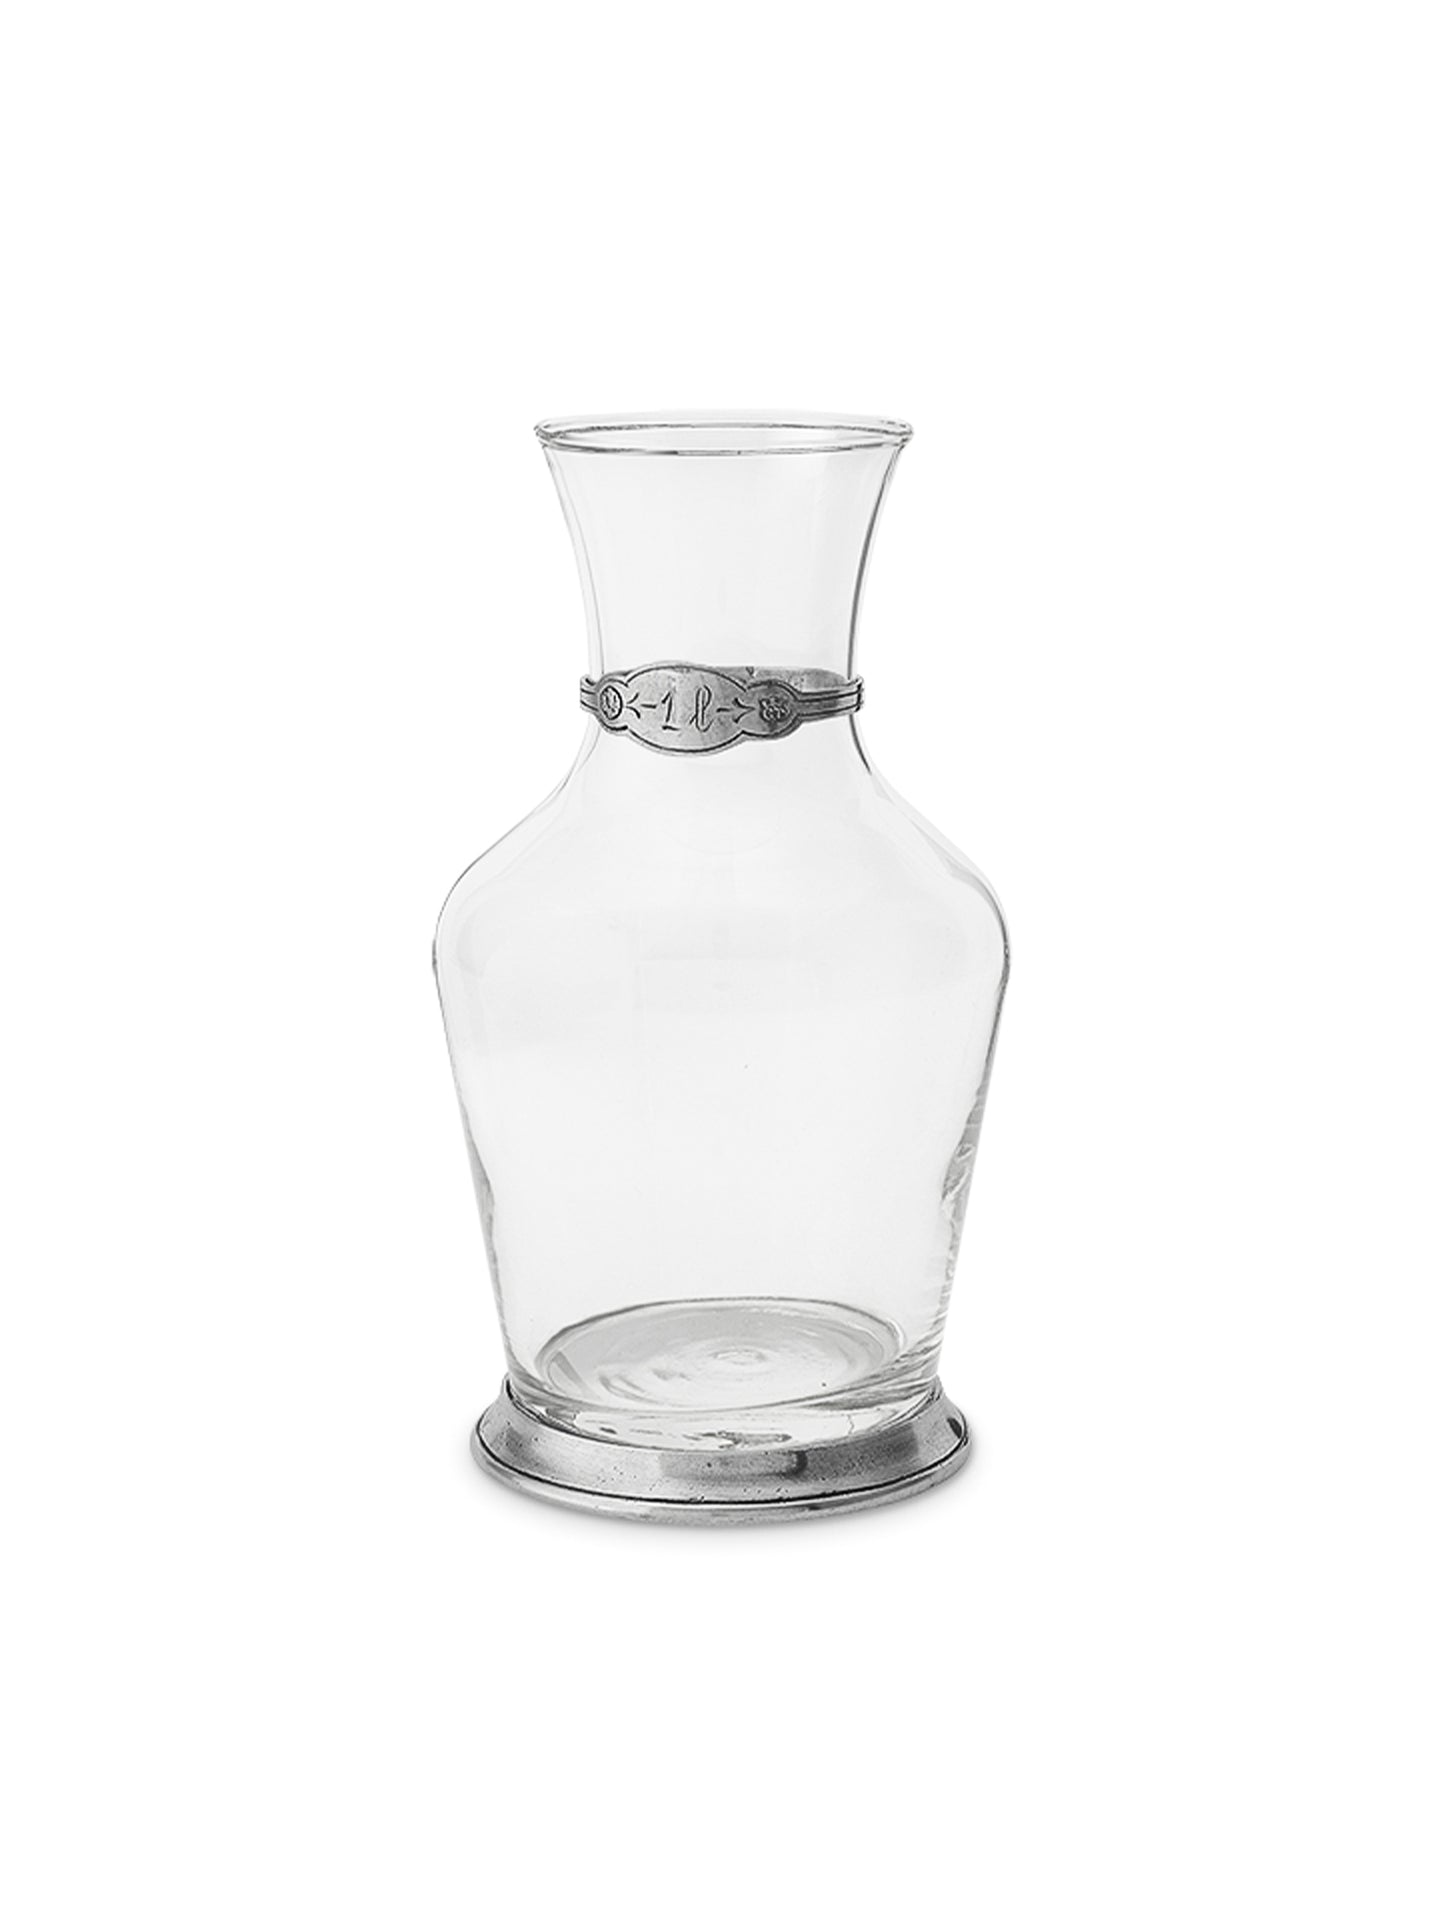 MATCH Pewter Glass Carafe 1L Weston Table